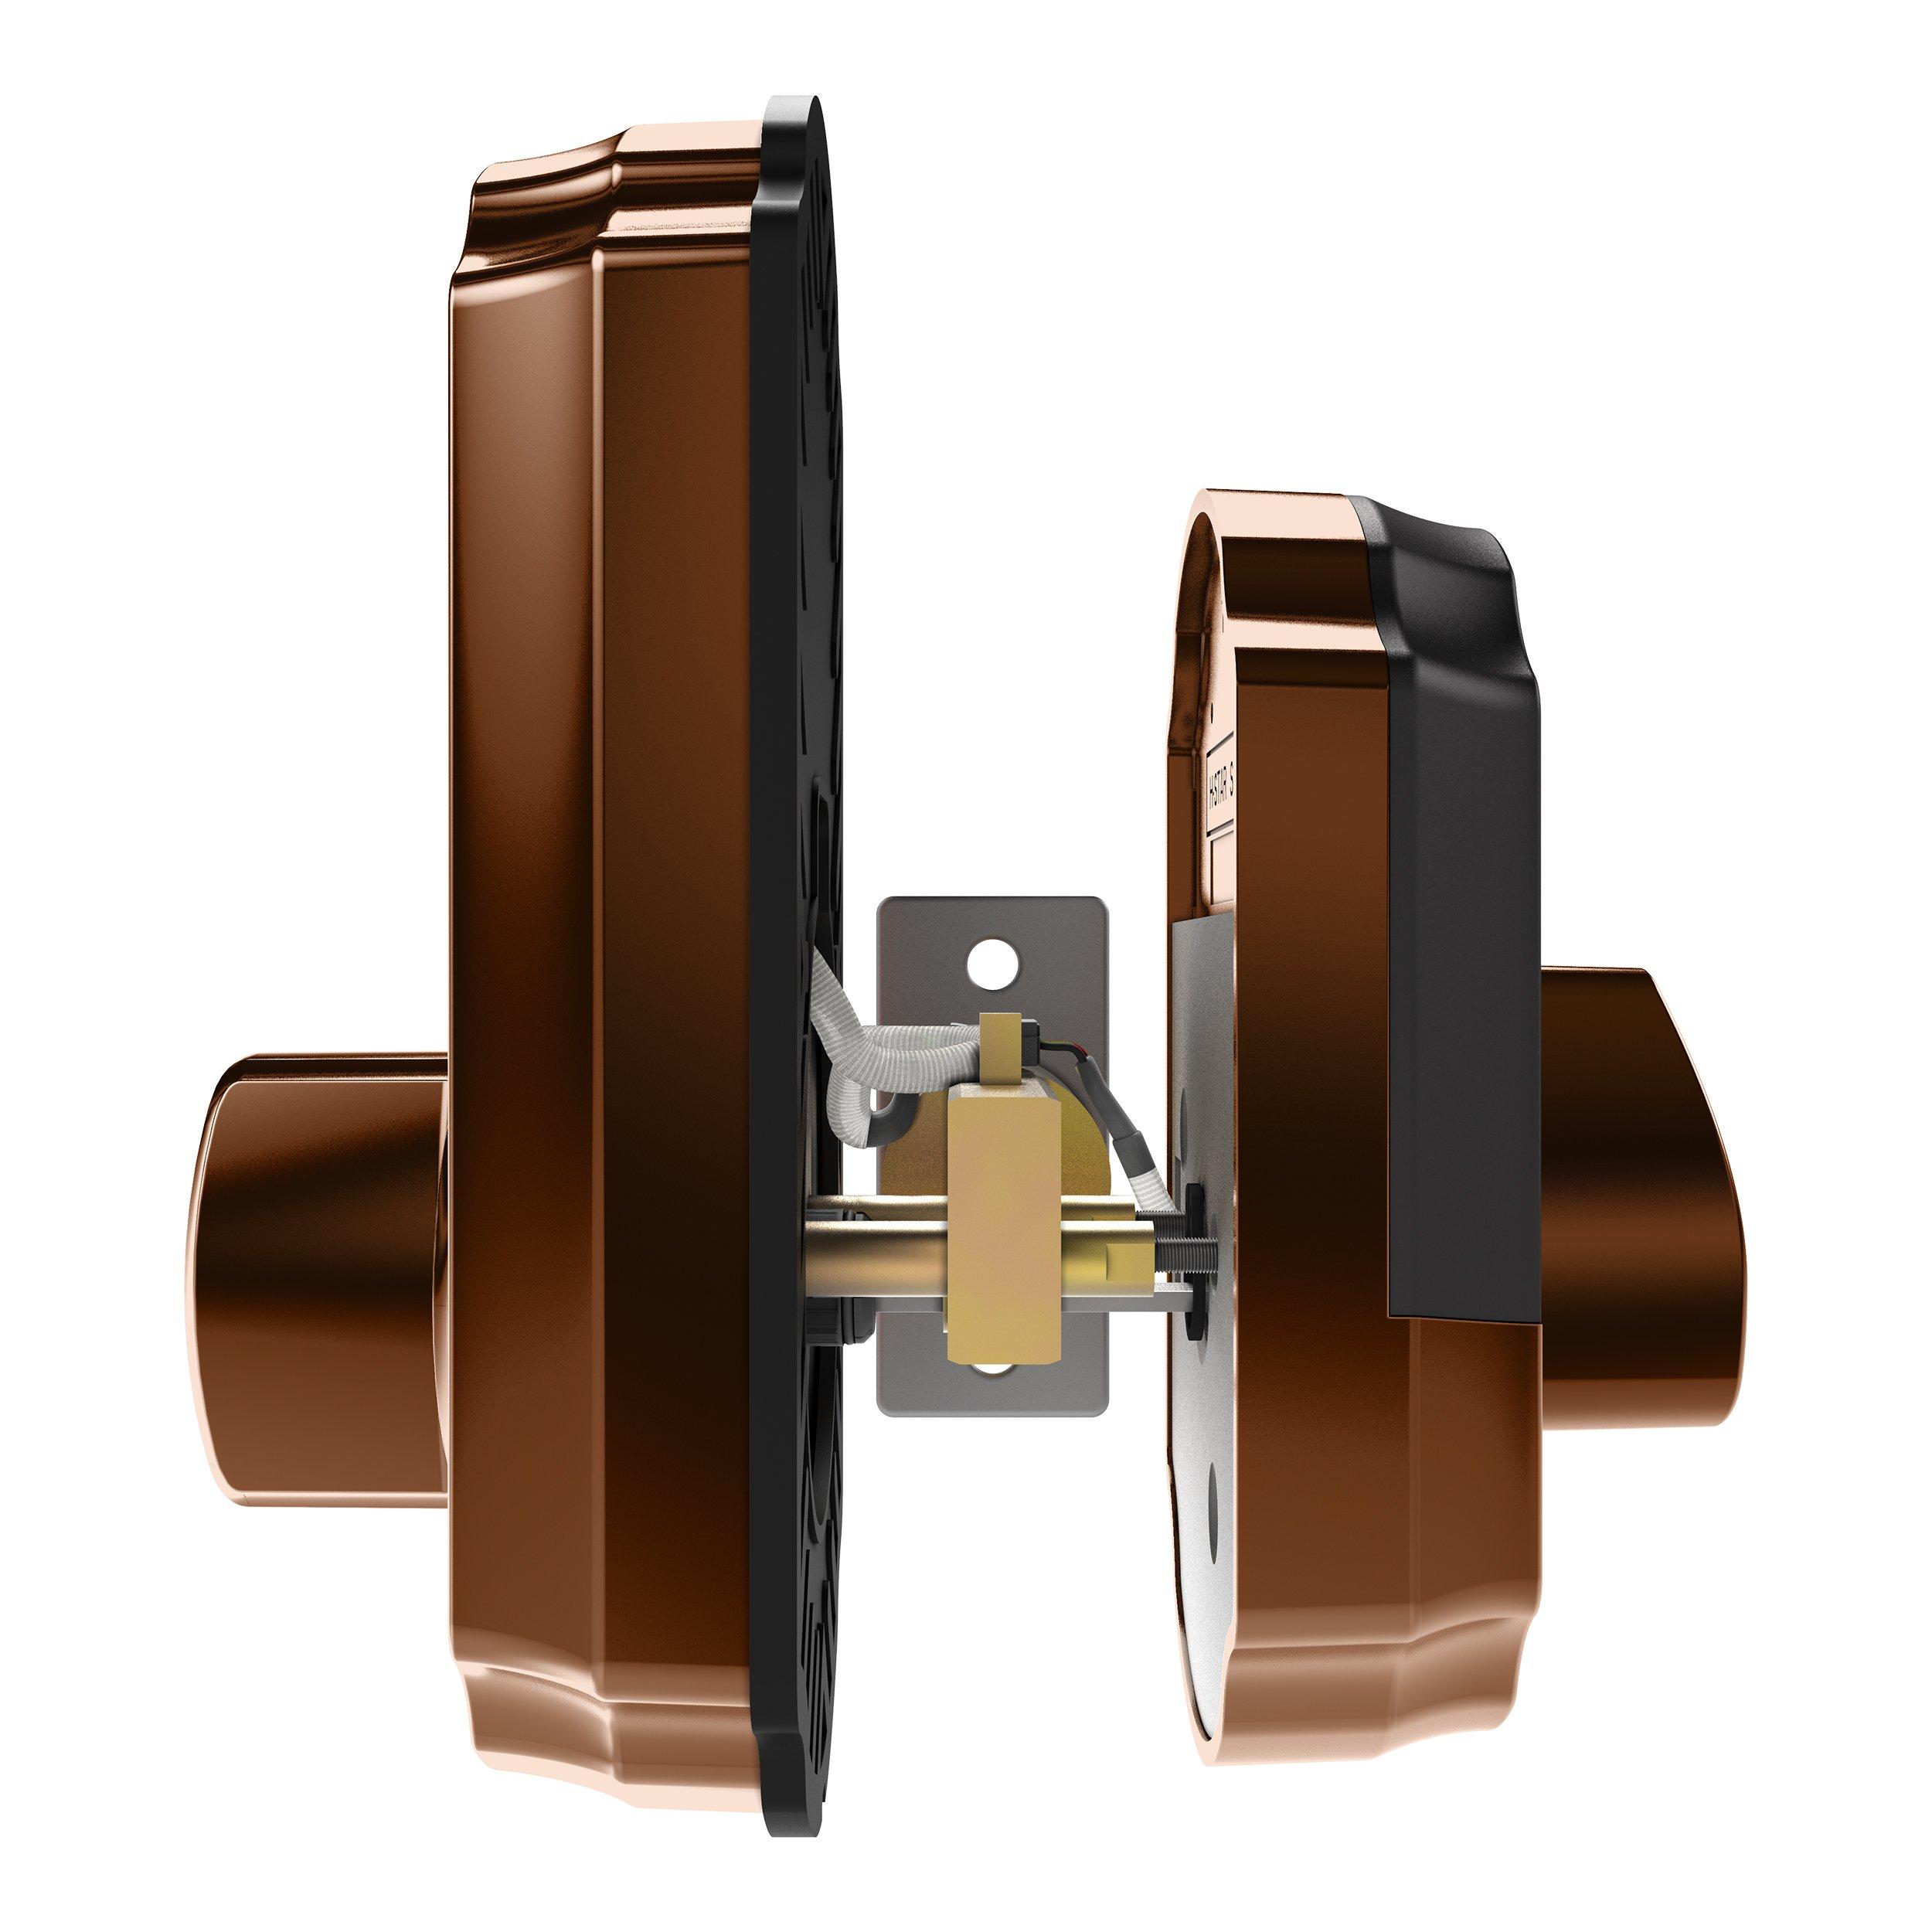 TurboLock TL115 Smart Lock with Keypad and Voice Prompts Bronze